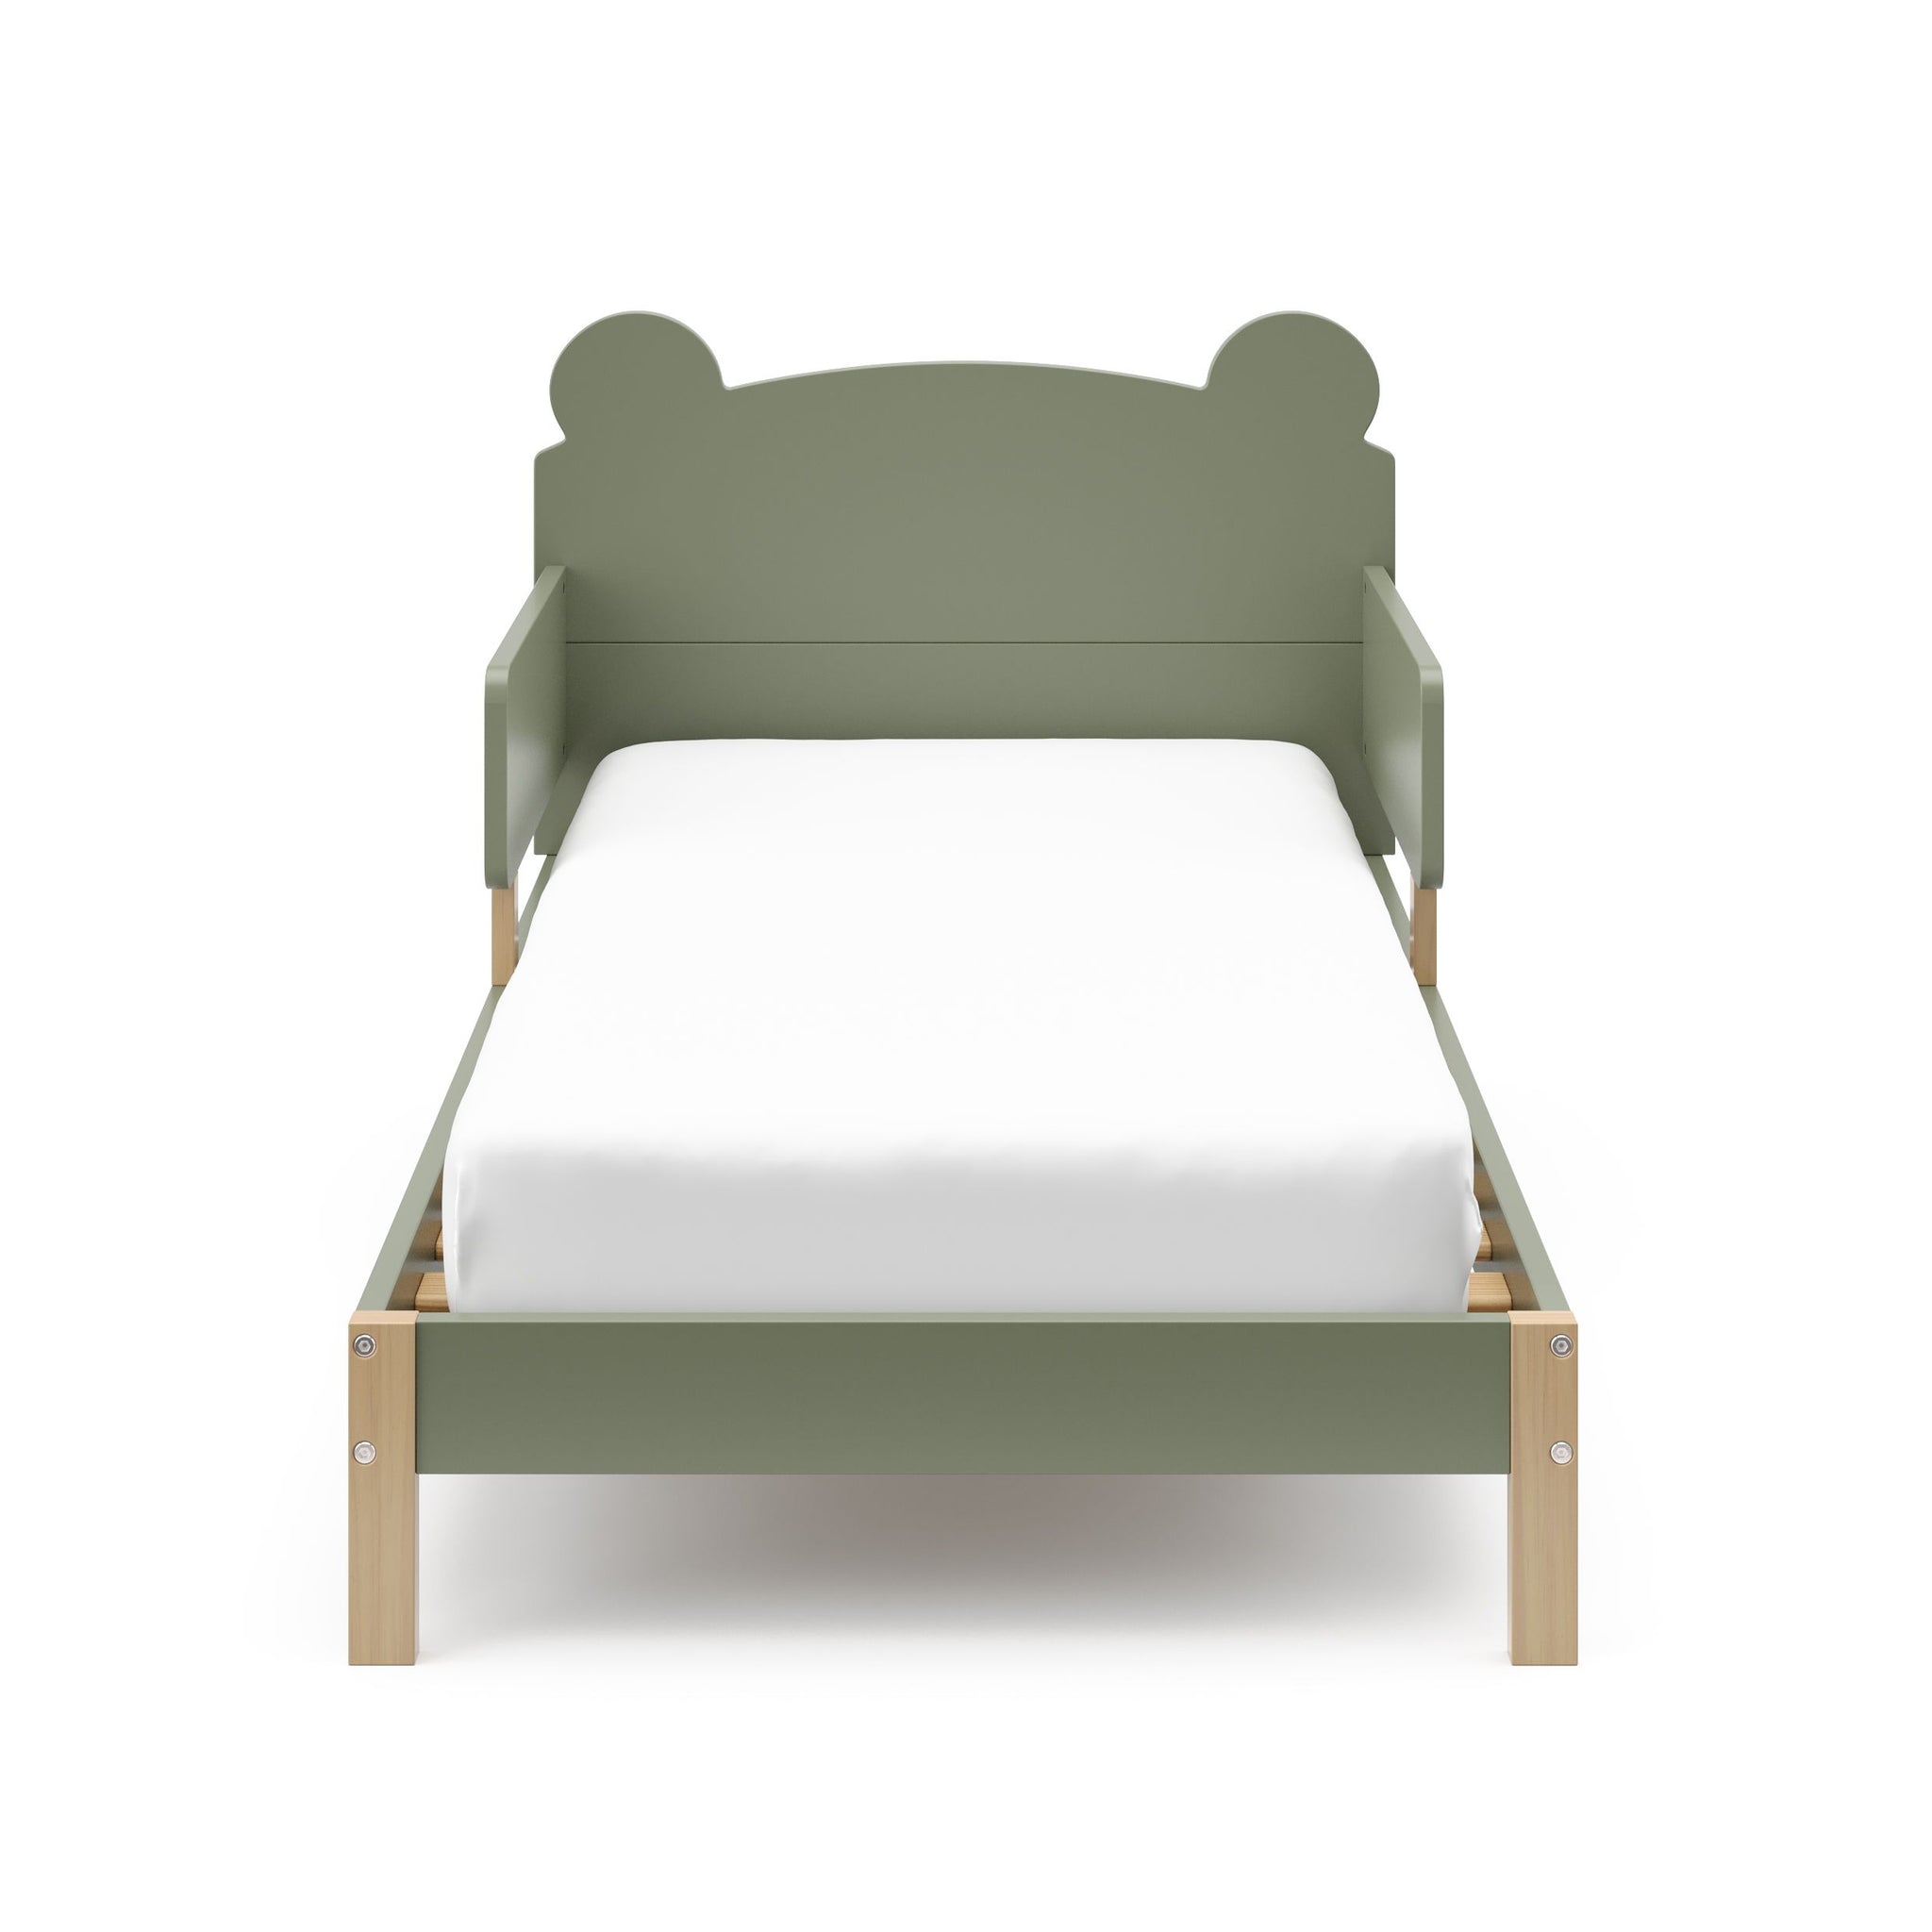 Front view of a olive-colored toddler bed